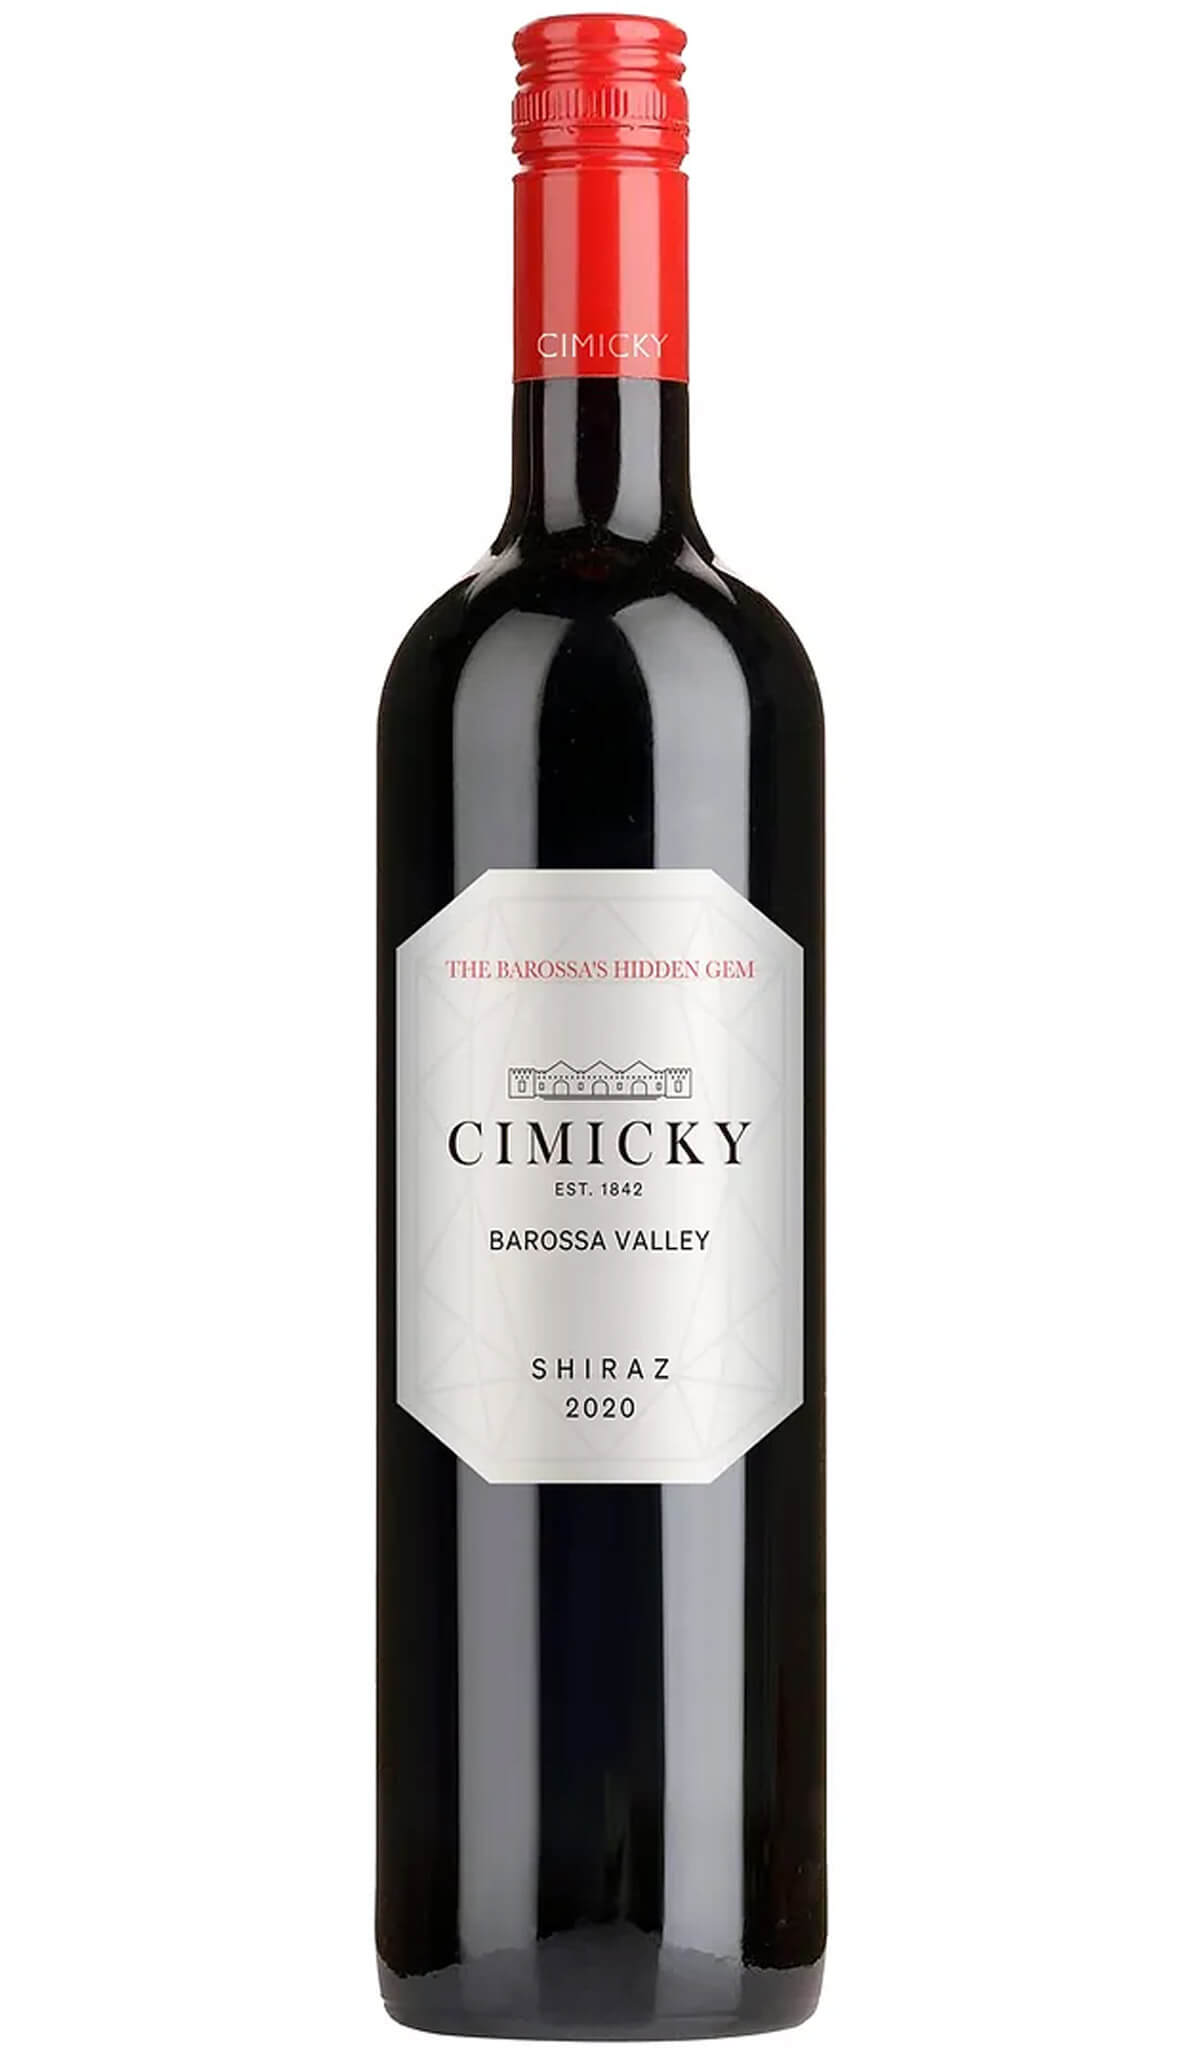 Find out more, explore the range and purchase Cimicky Hidden Gem Shiraz 2020 (Barossa Valley) available online at Wine Sellers Direct - Australia's independent liquor specialists.